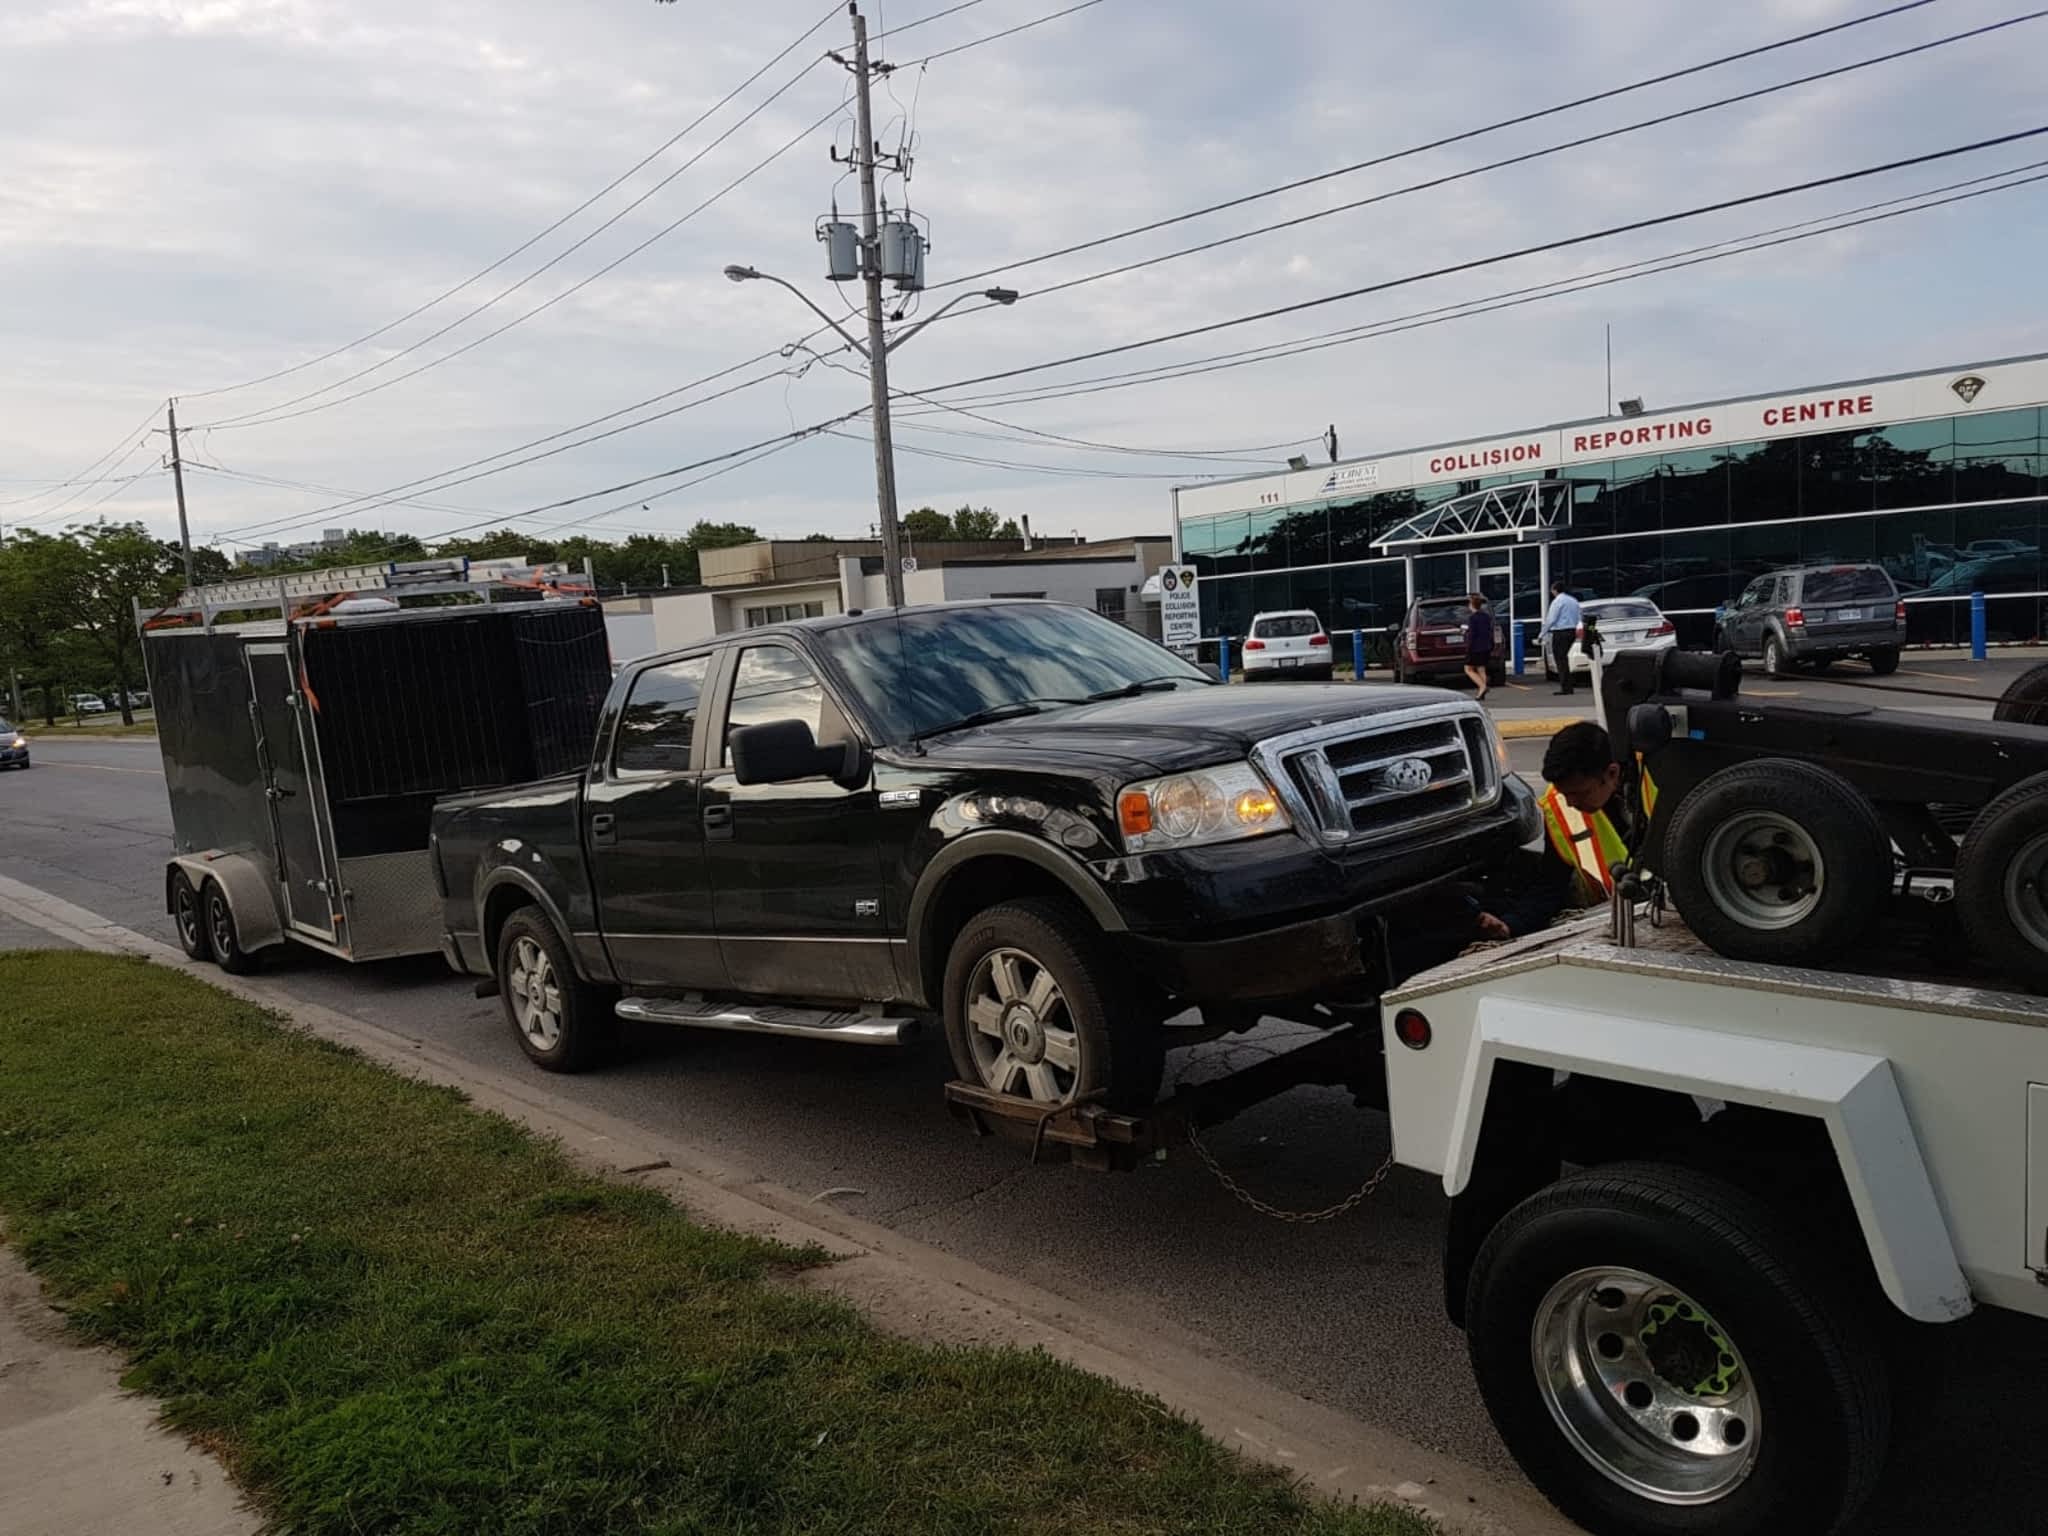 photo Divisional Towing & Storage Inc